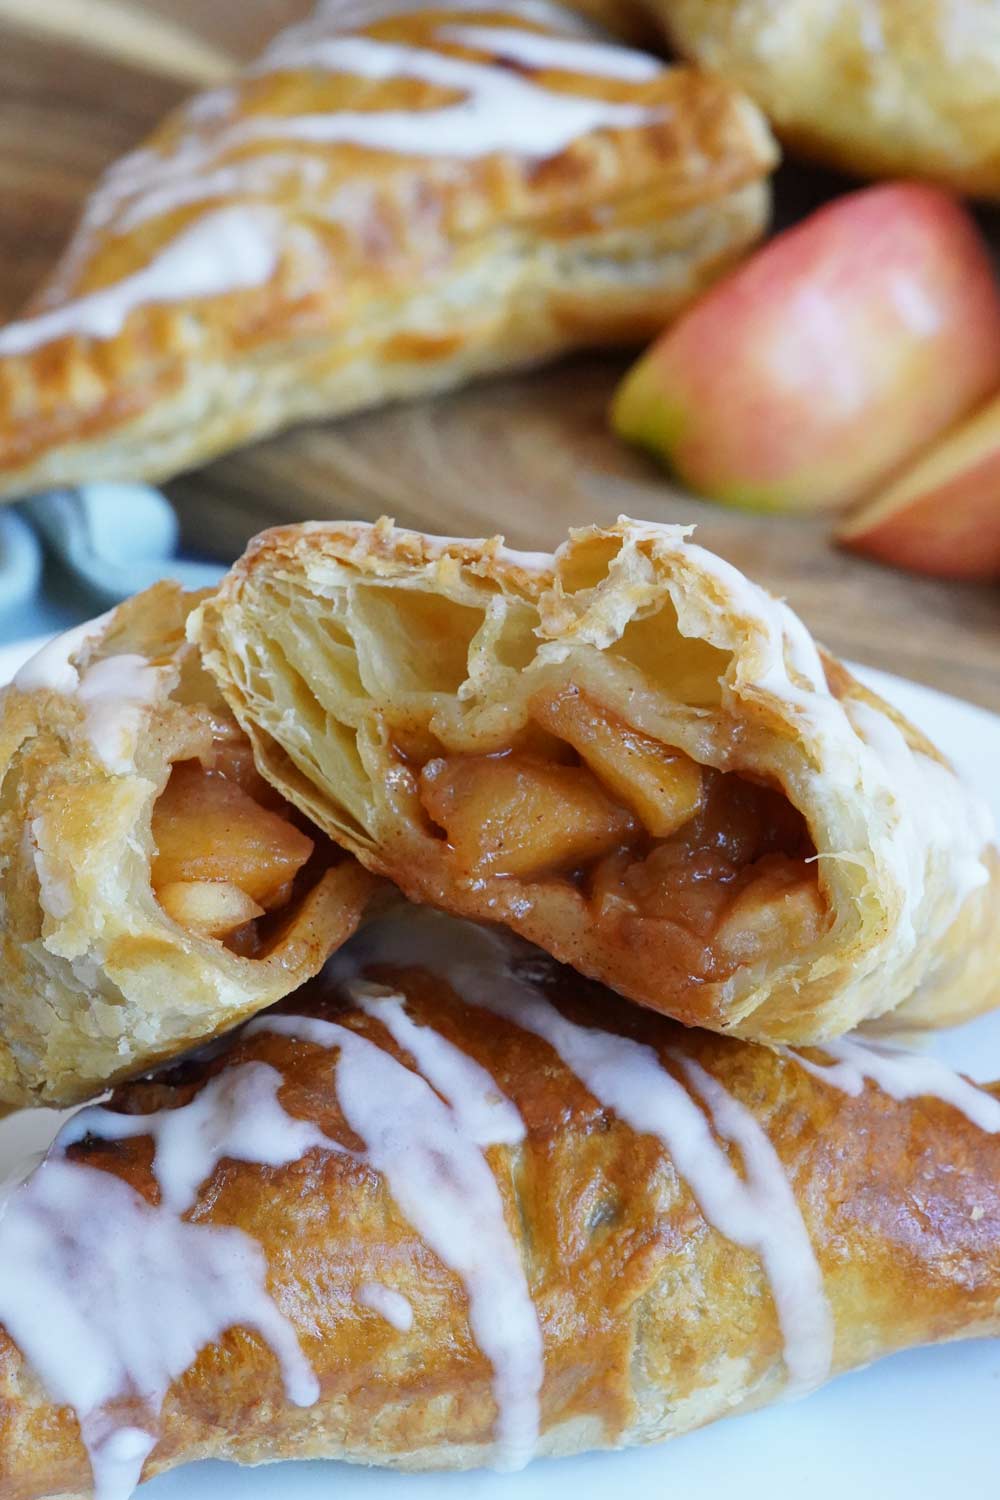 Apple turnovers with one cut in half